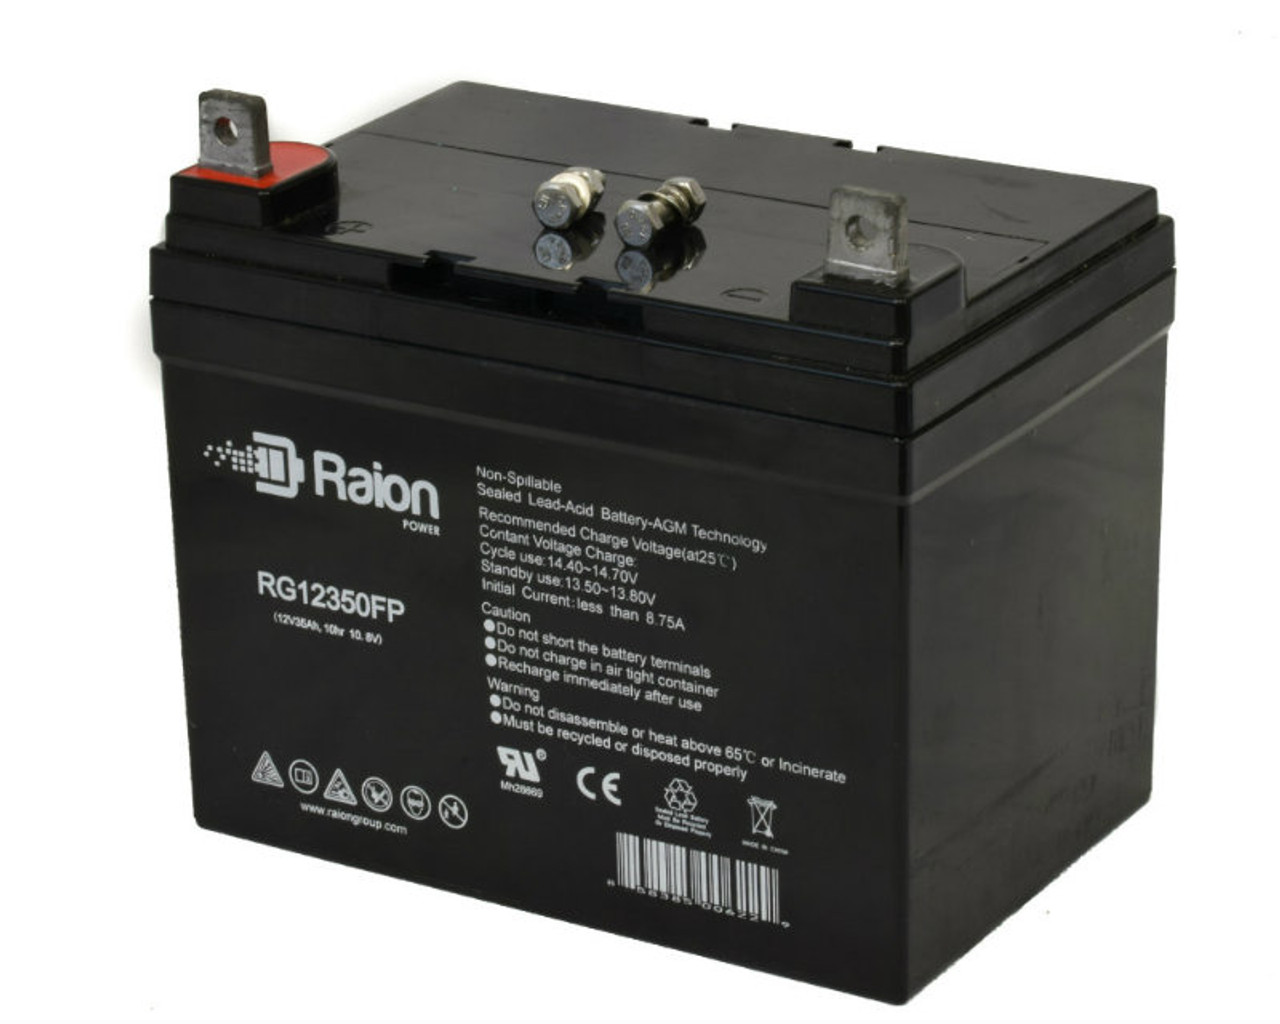 Raion Power Replacement 12V 35Ah RG12350FP Battery for Ingersoll Equipment 112